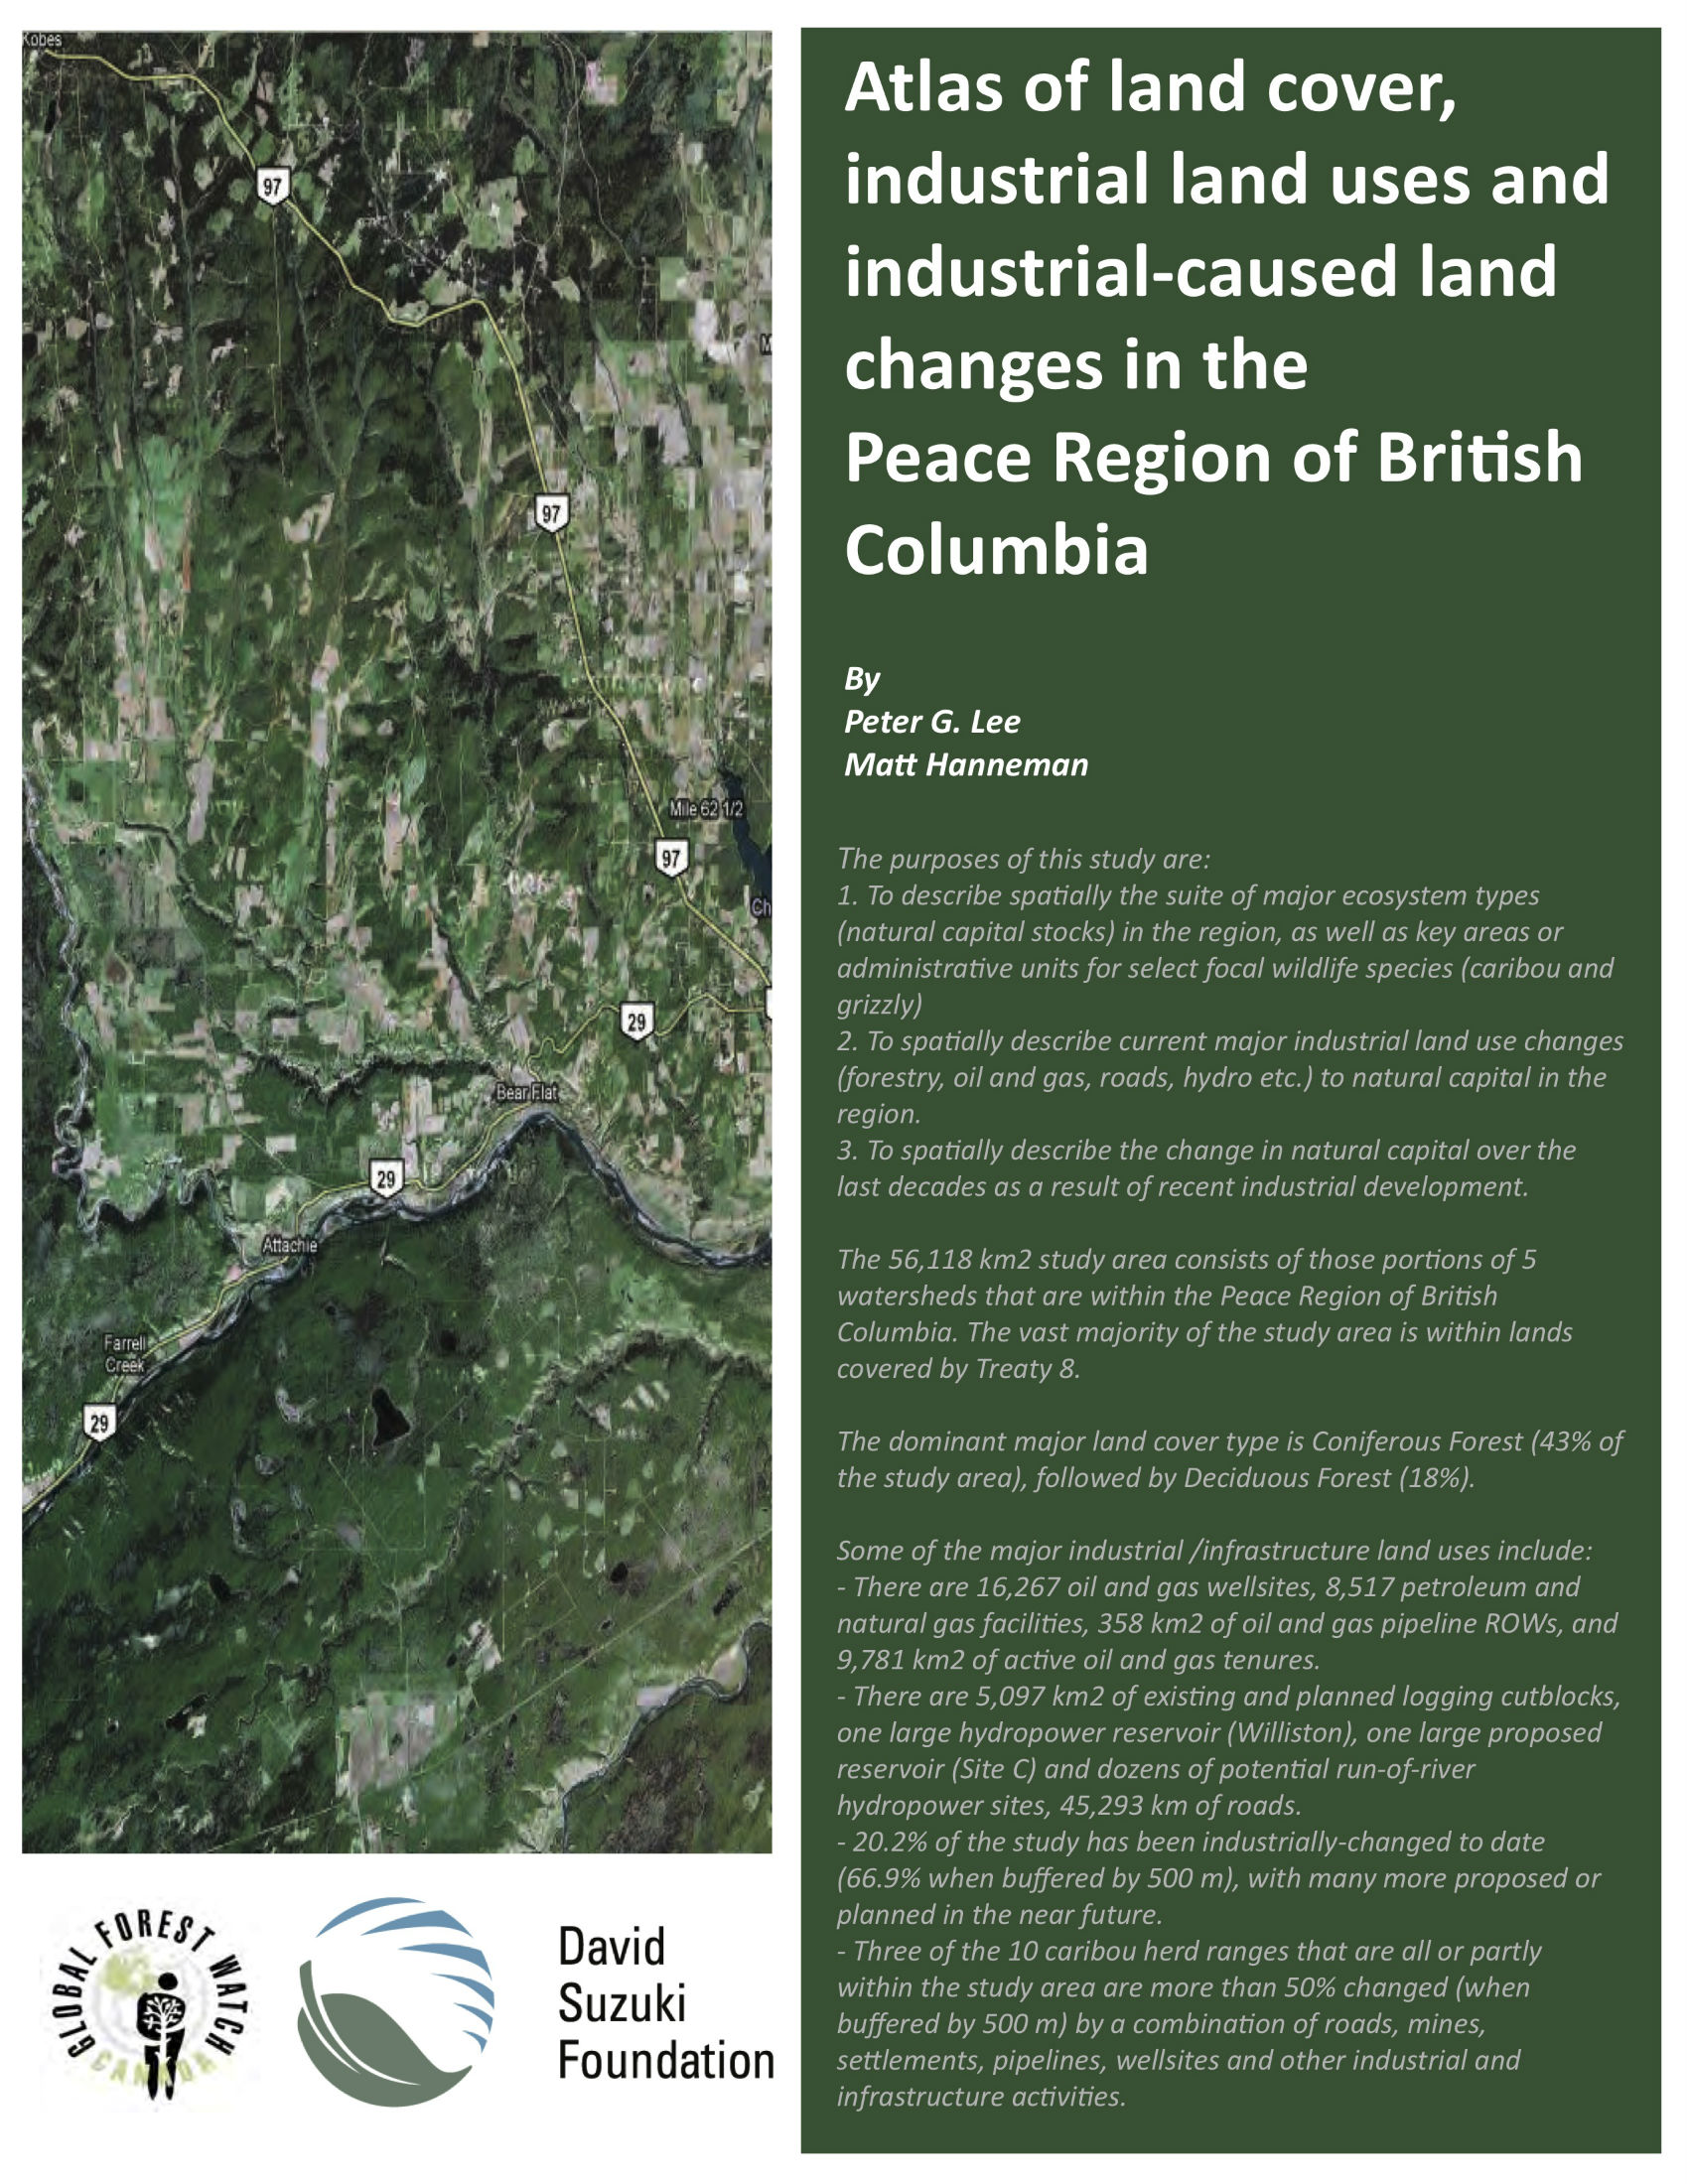 Atlas of Land Cover, Industrial Land Uses and Industrial-Caused Land Changes in the Peace Region of British Columbia